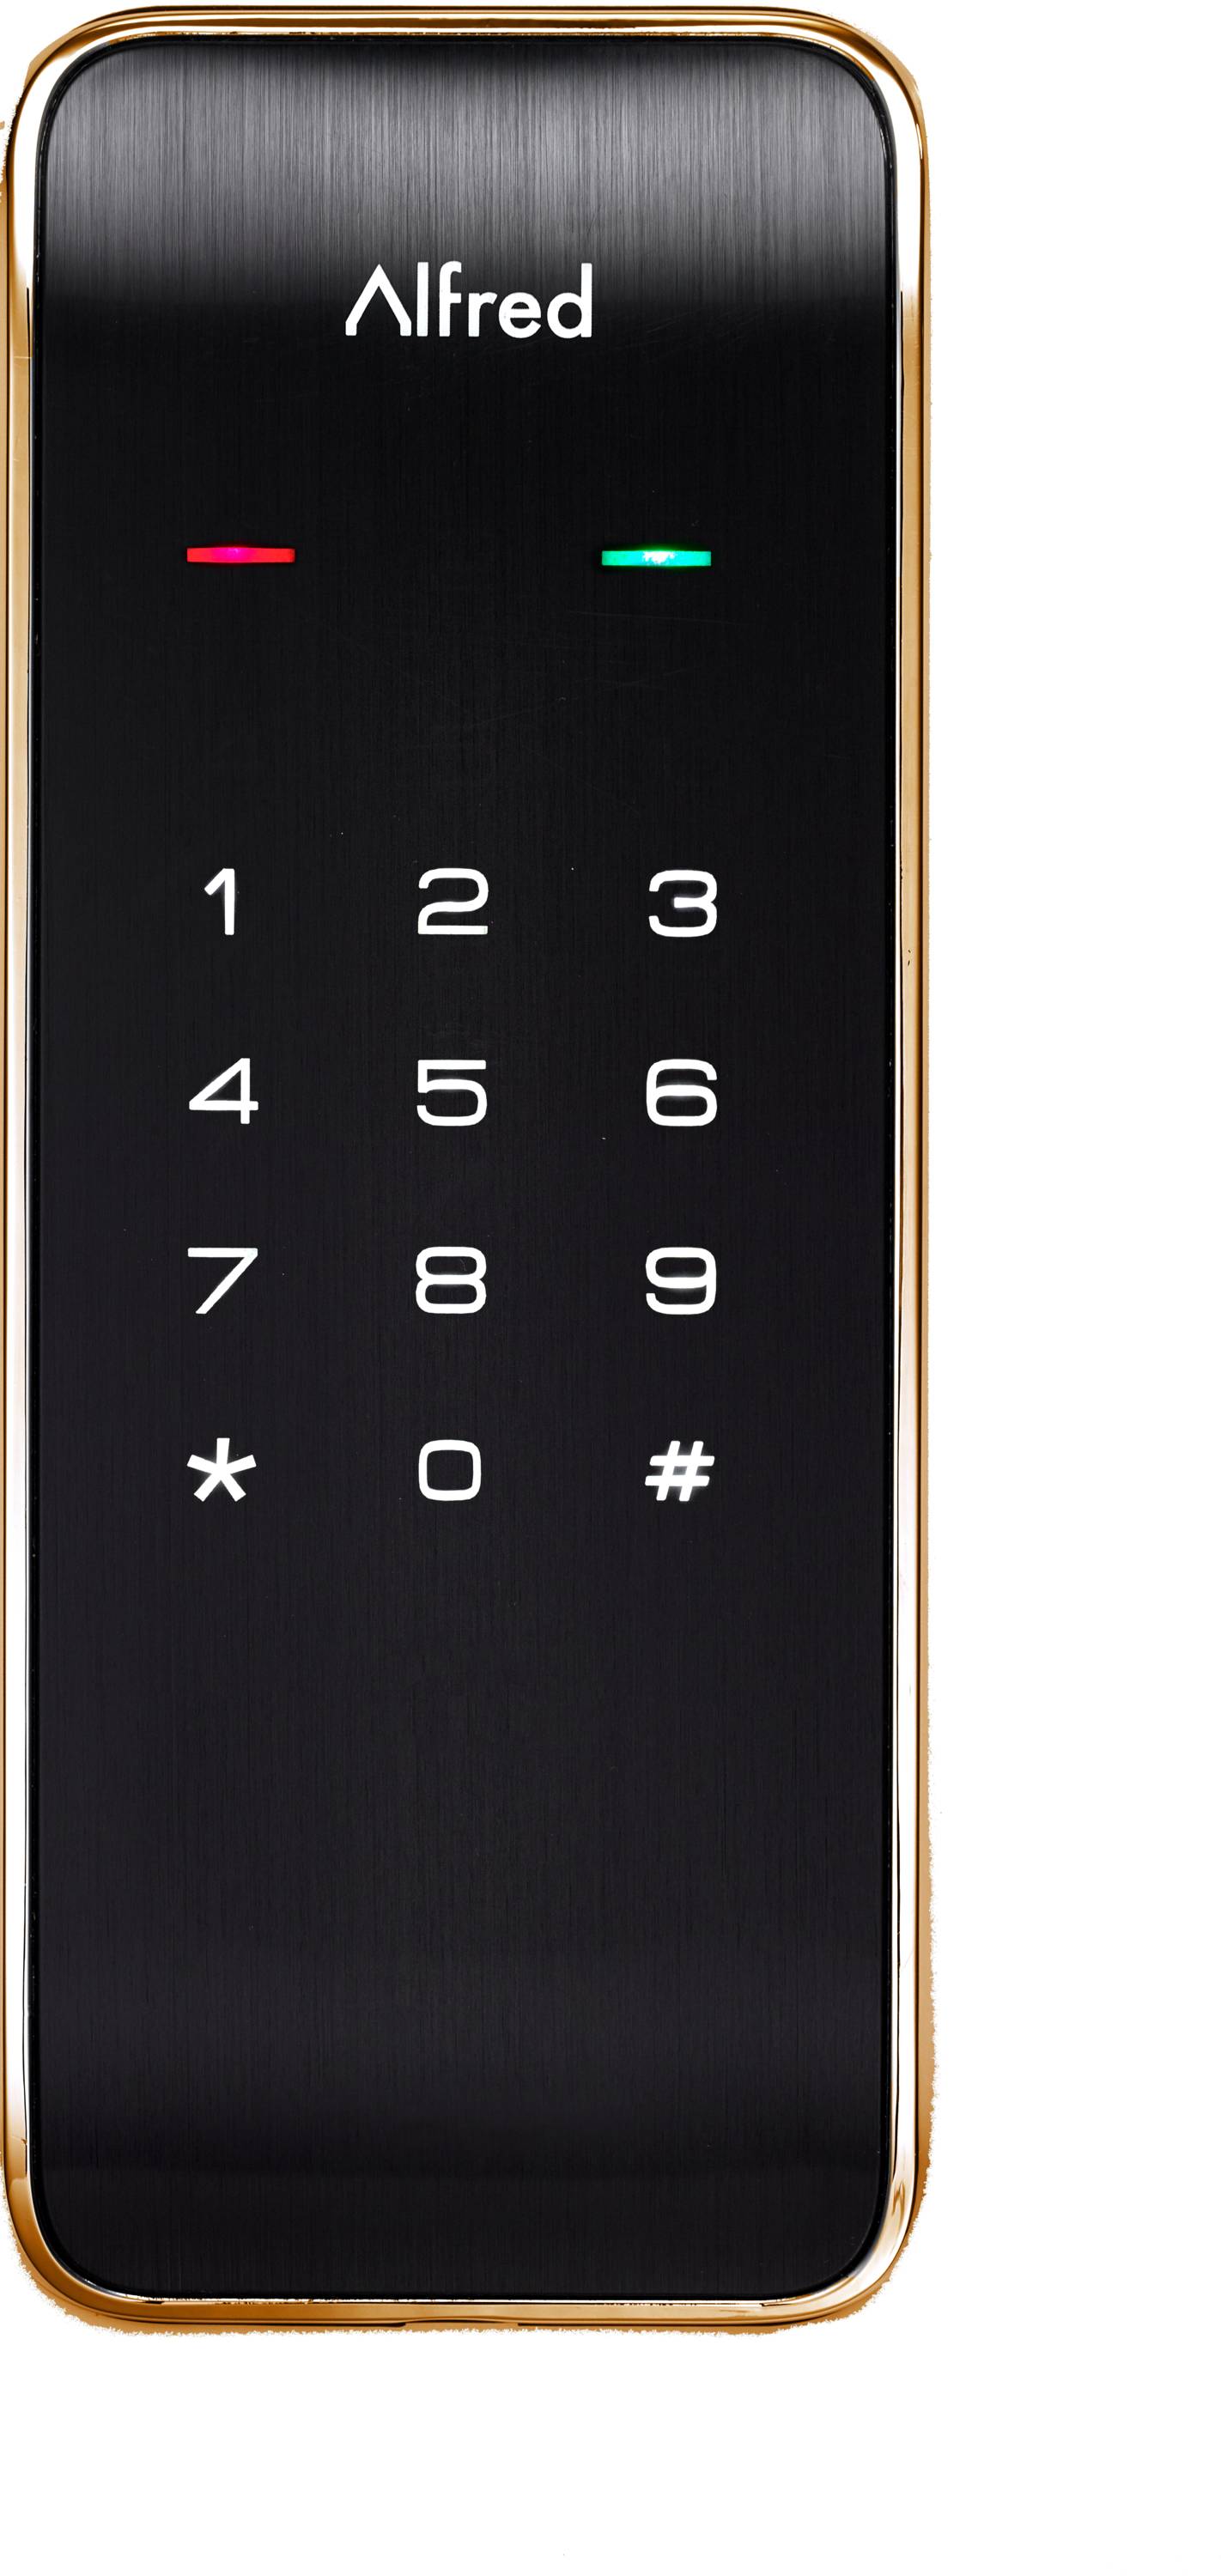 Alfred DB2 Gold Bluetooth Enabled Electronic Deadbolt Lighted Keypad Touchscreen